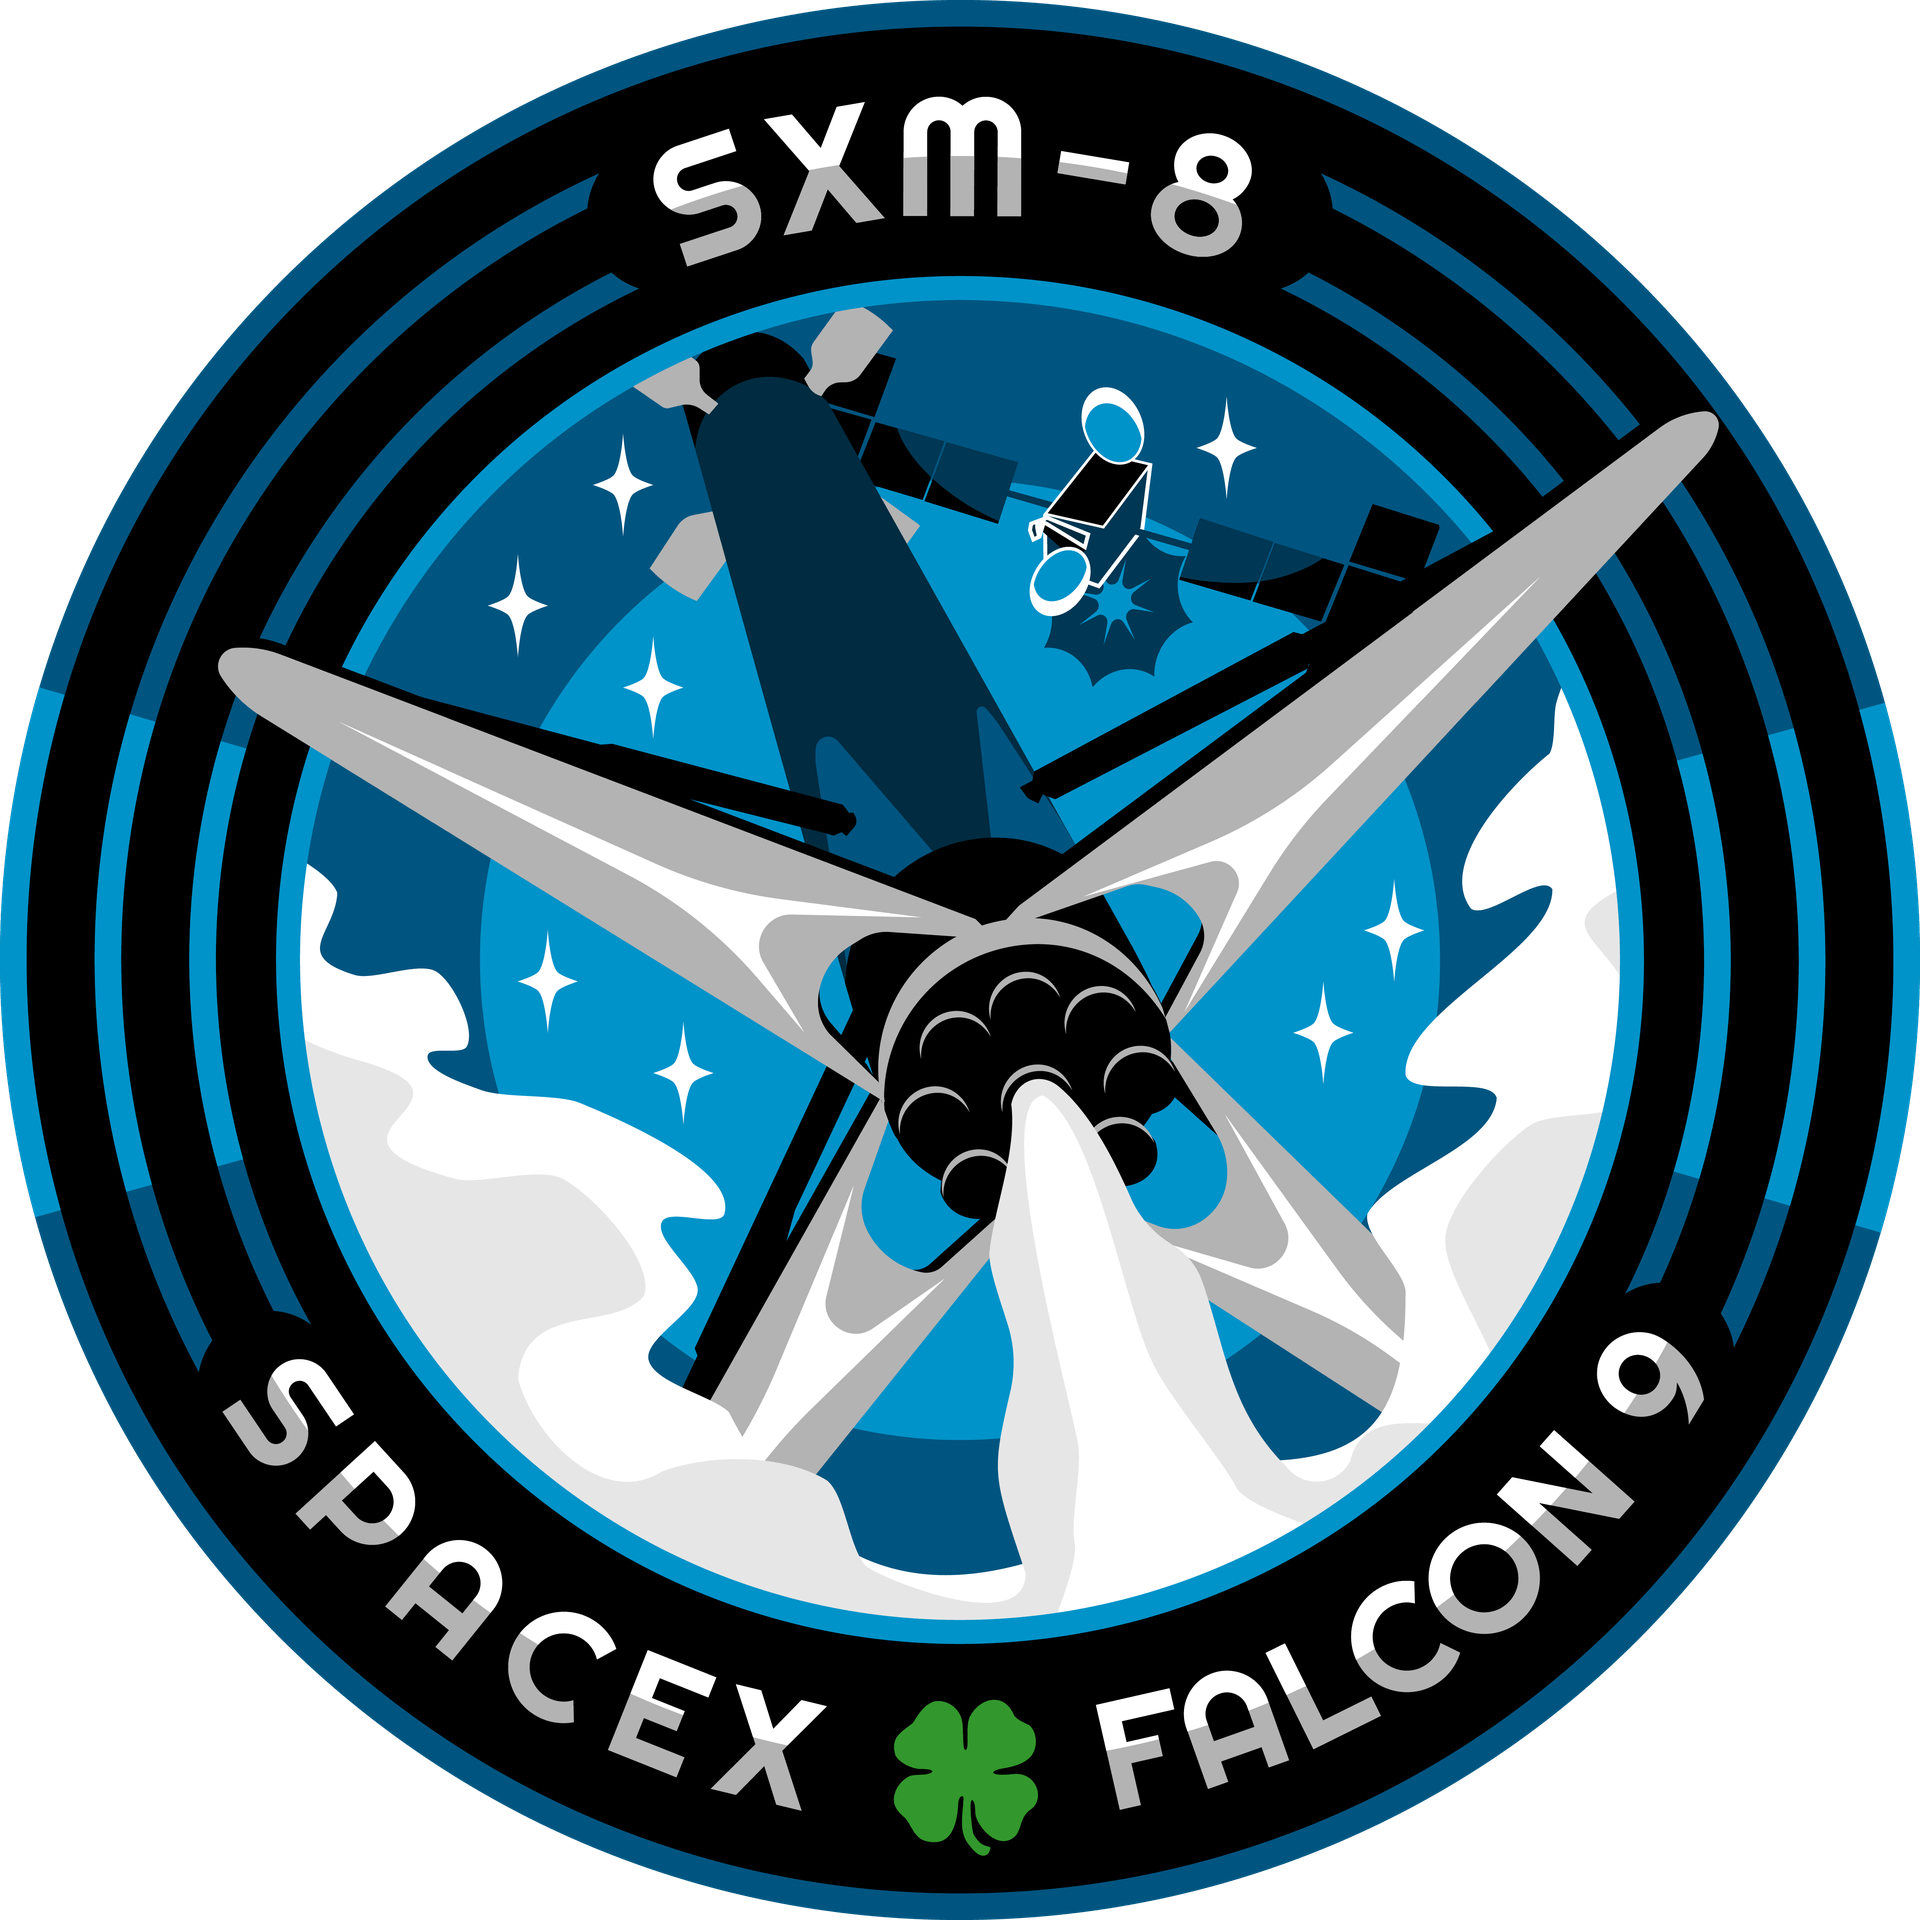 Mission patch for SXM-8